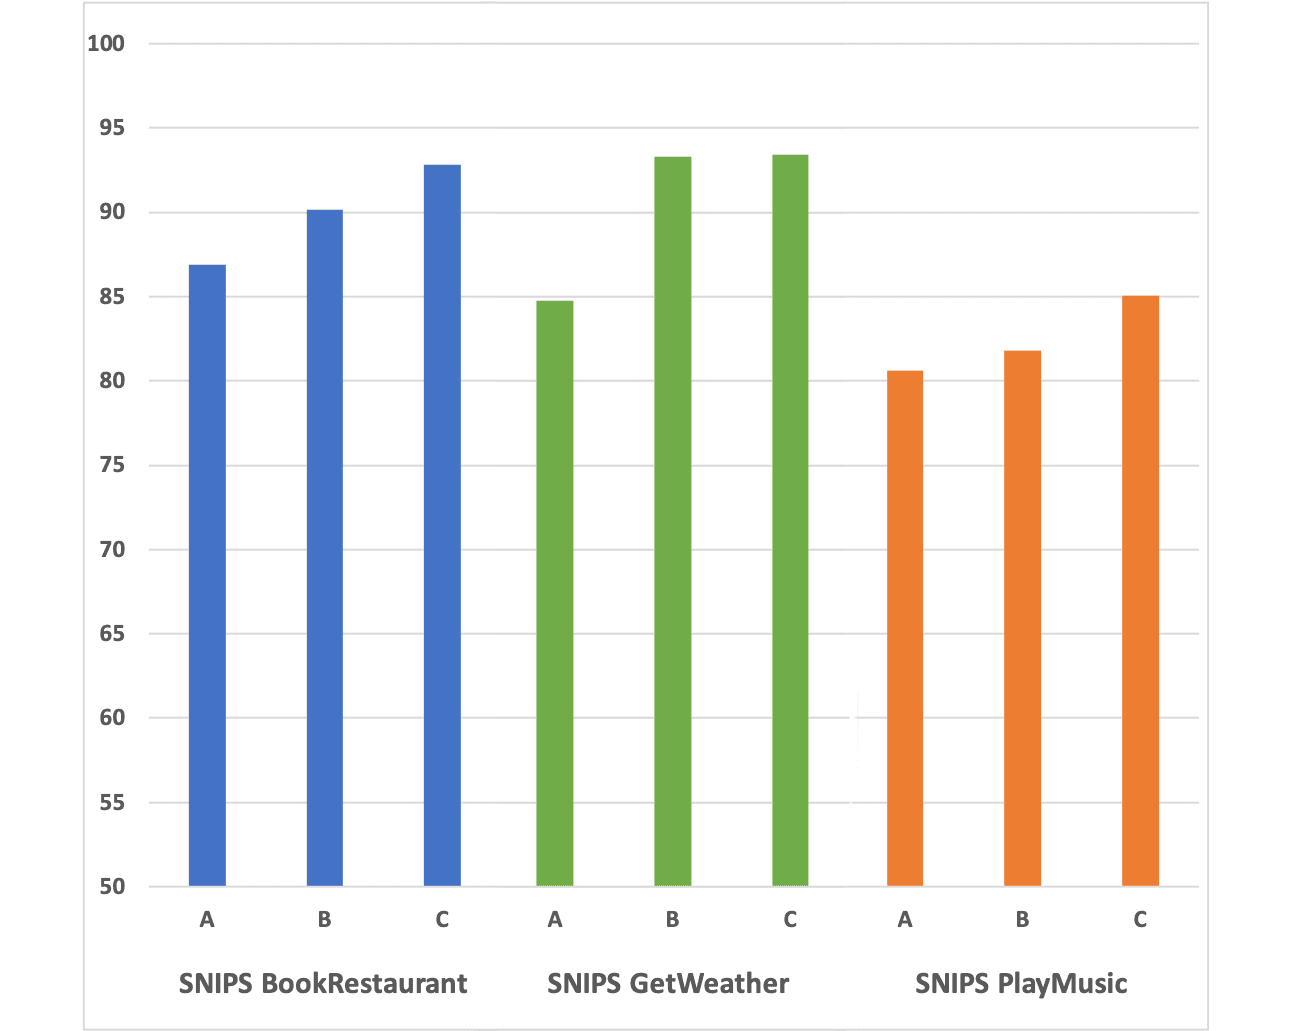 Column chart showing the distribution of micro-averaged F1 scores for the nine configurations trained.